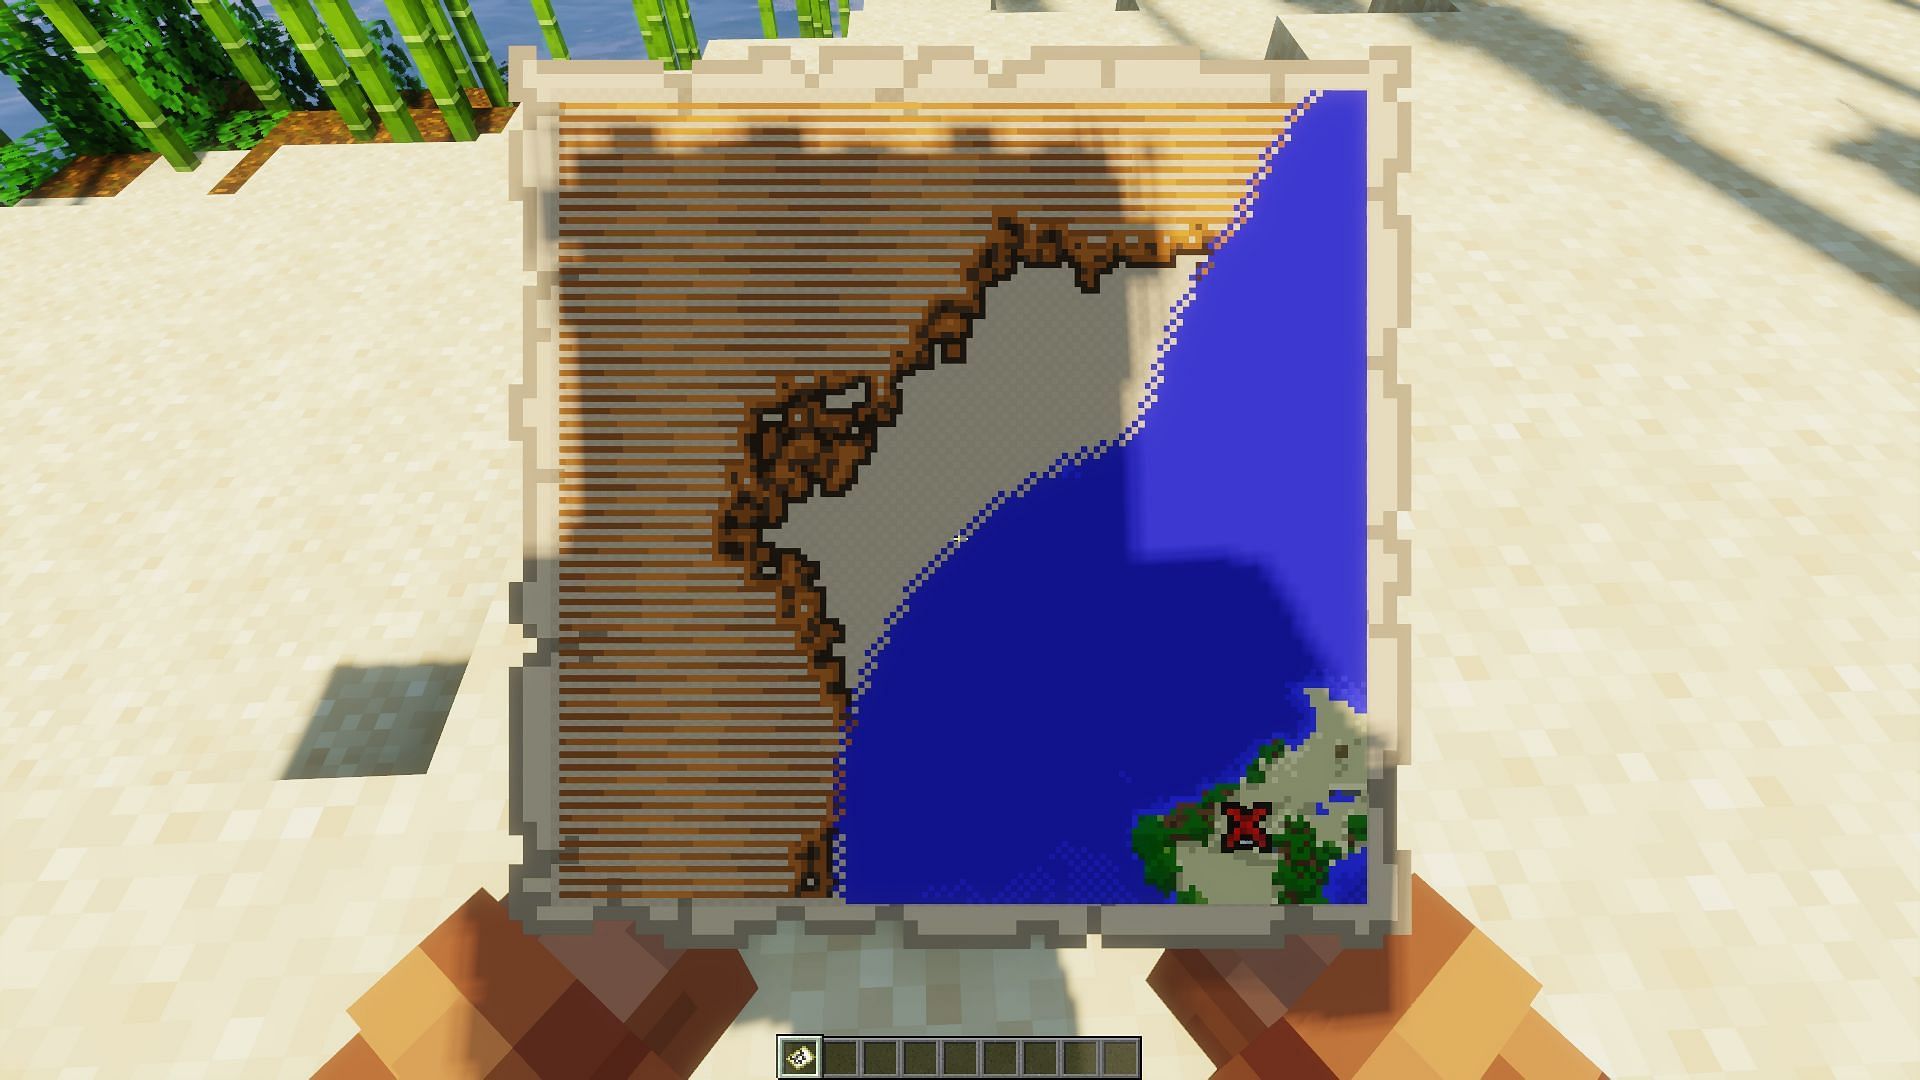 The orientation to position the player directly above the treasure (Image via Minecraft)